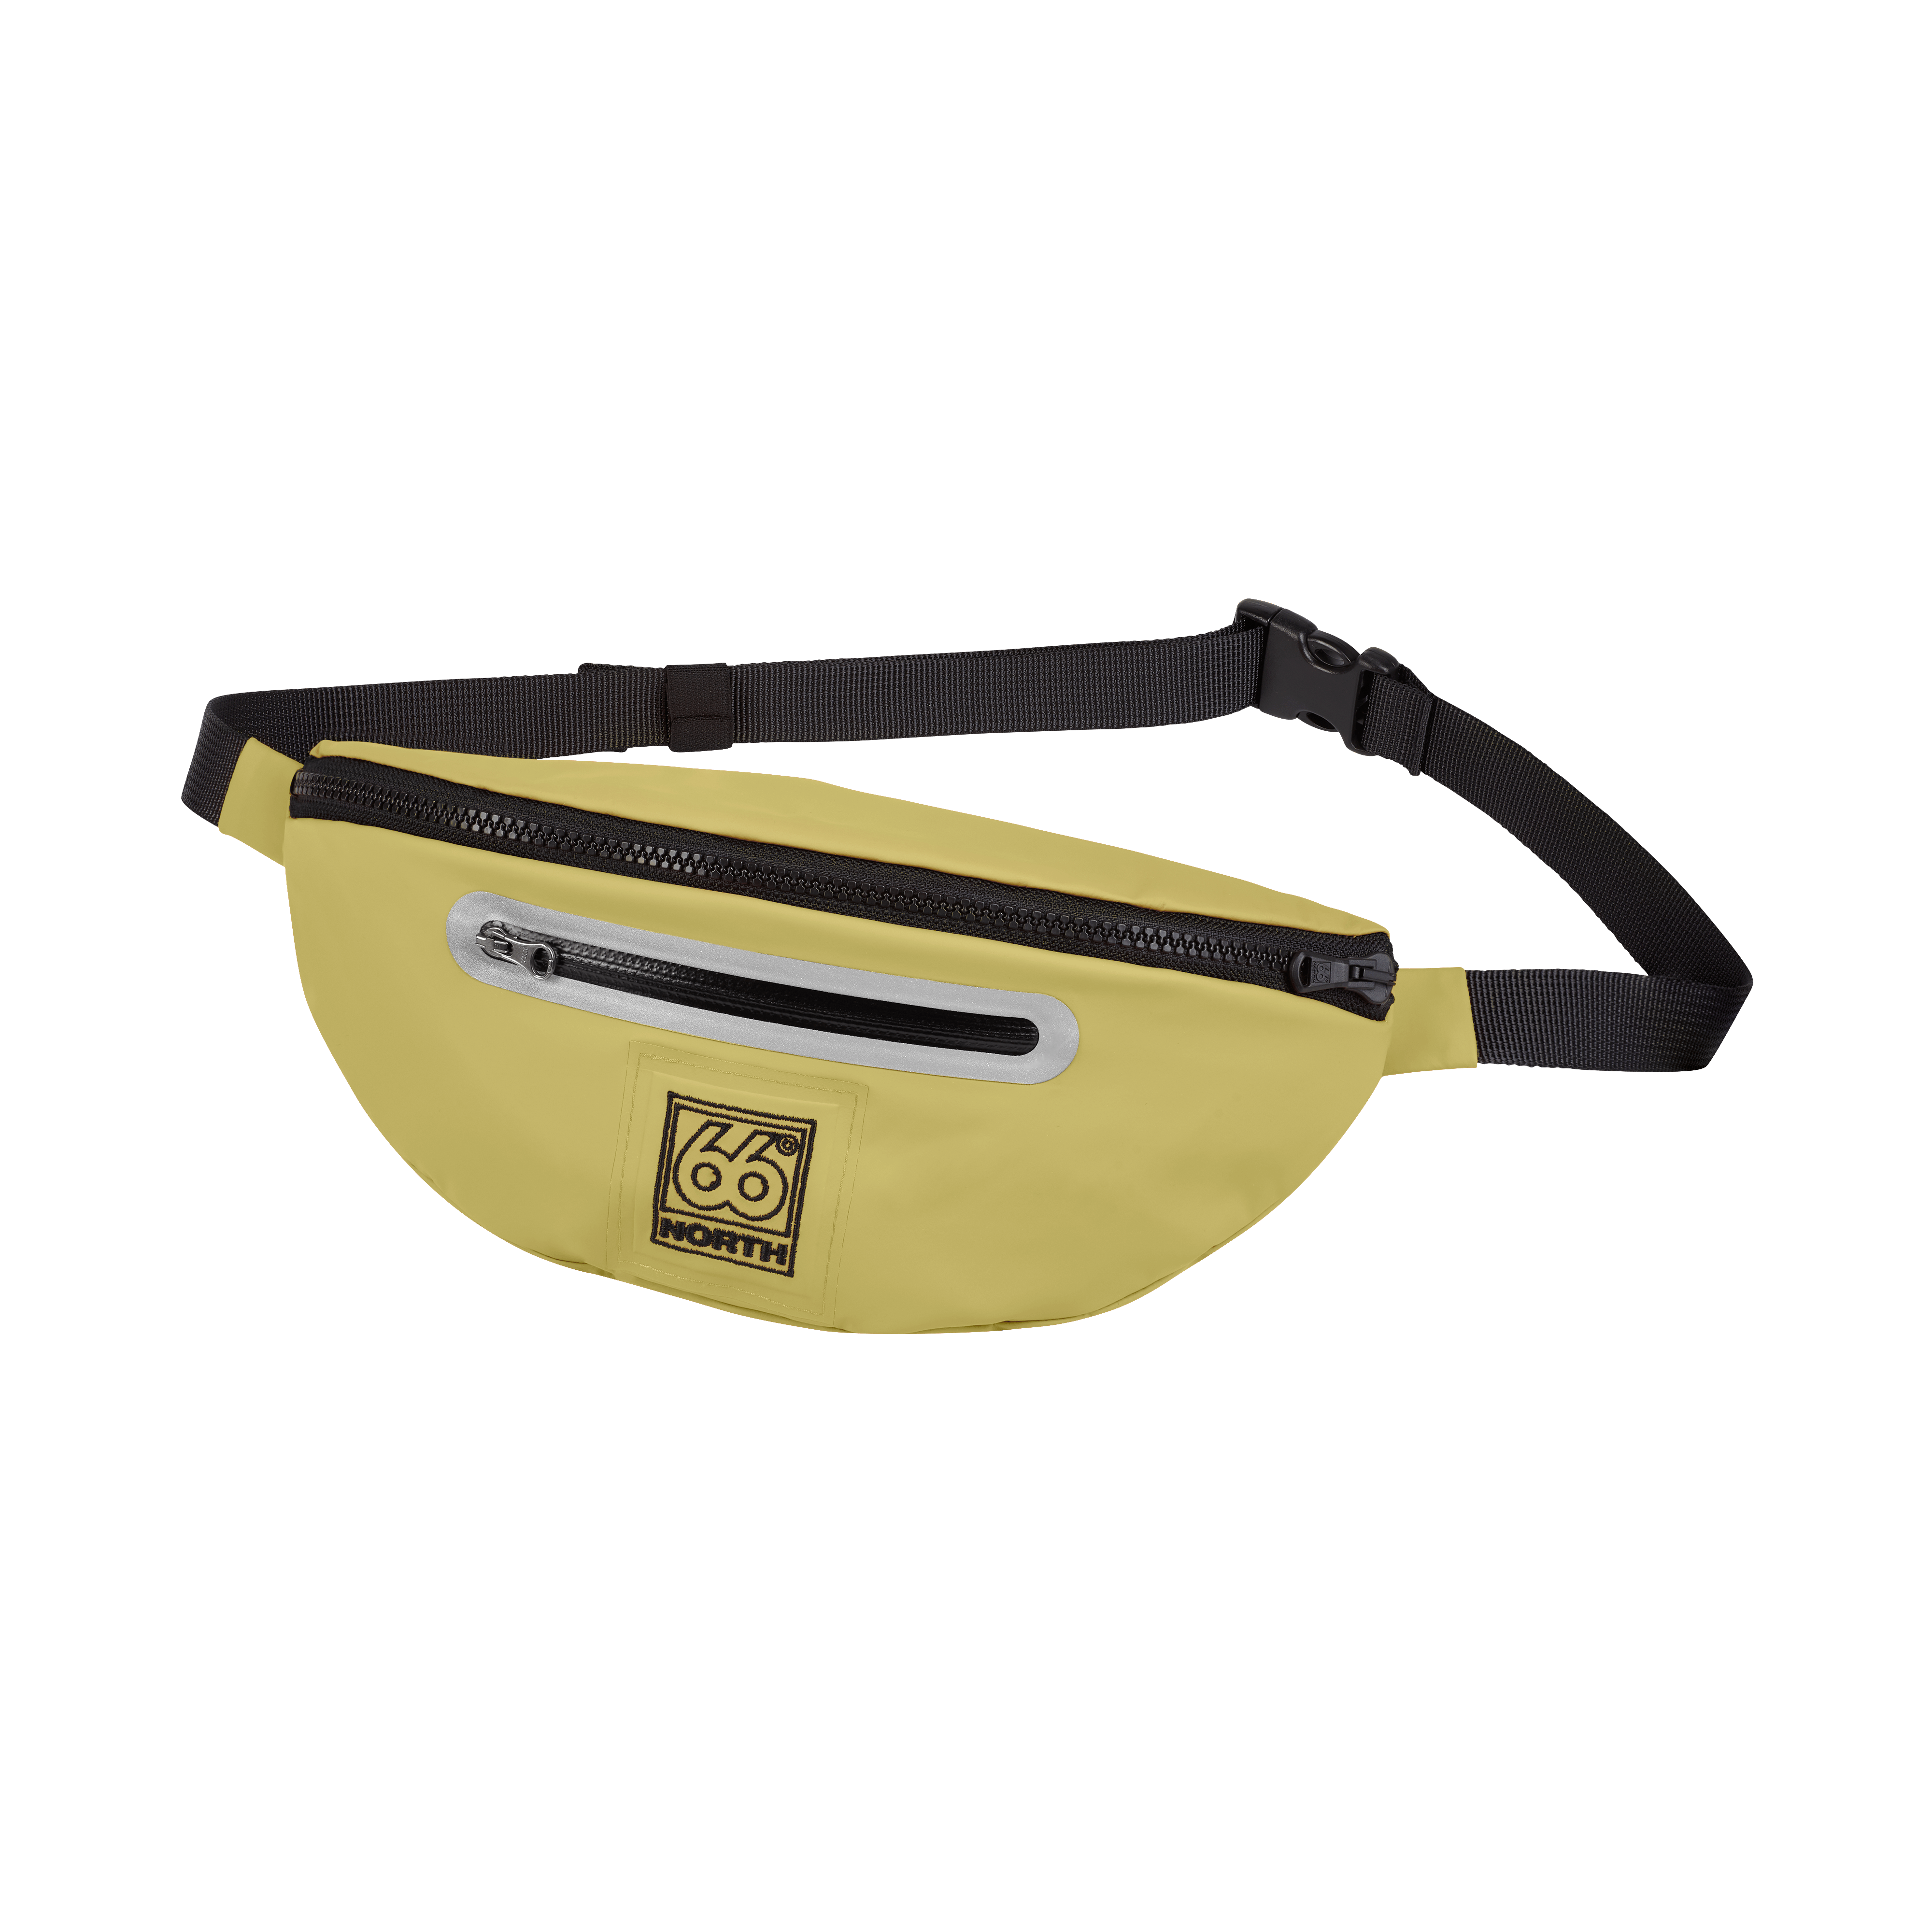 66 North Women's Bum Bag Accessories In Wooly Willow 